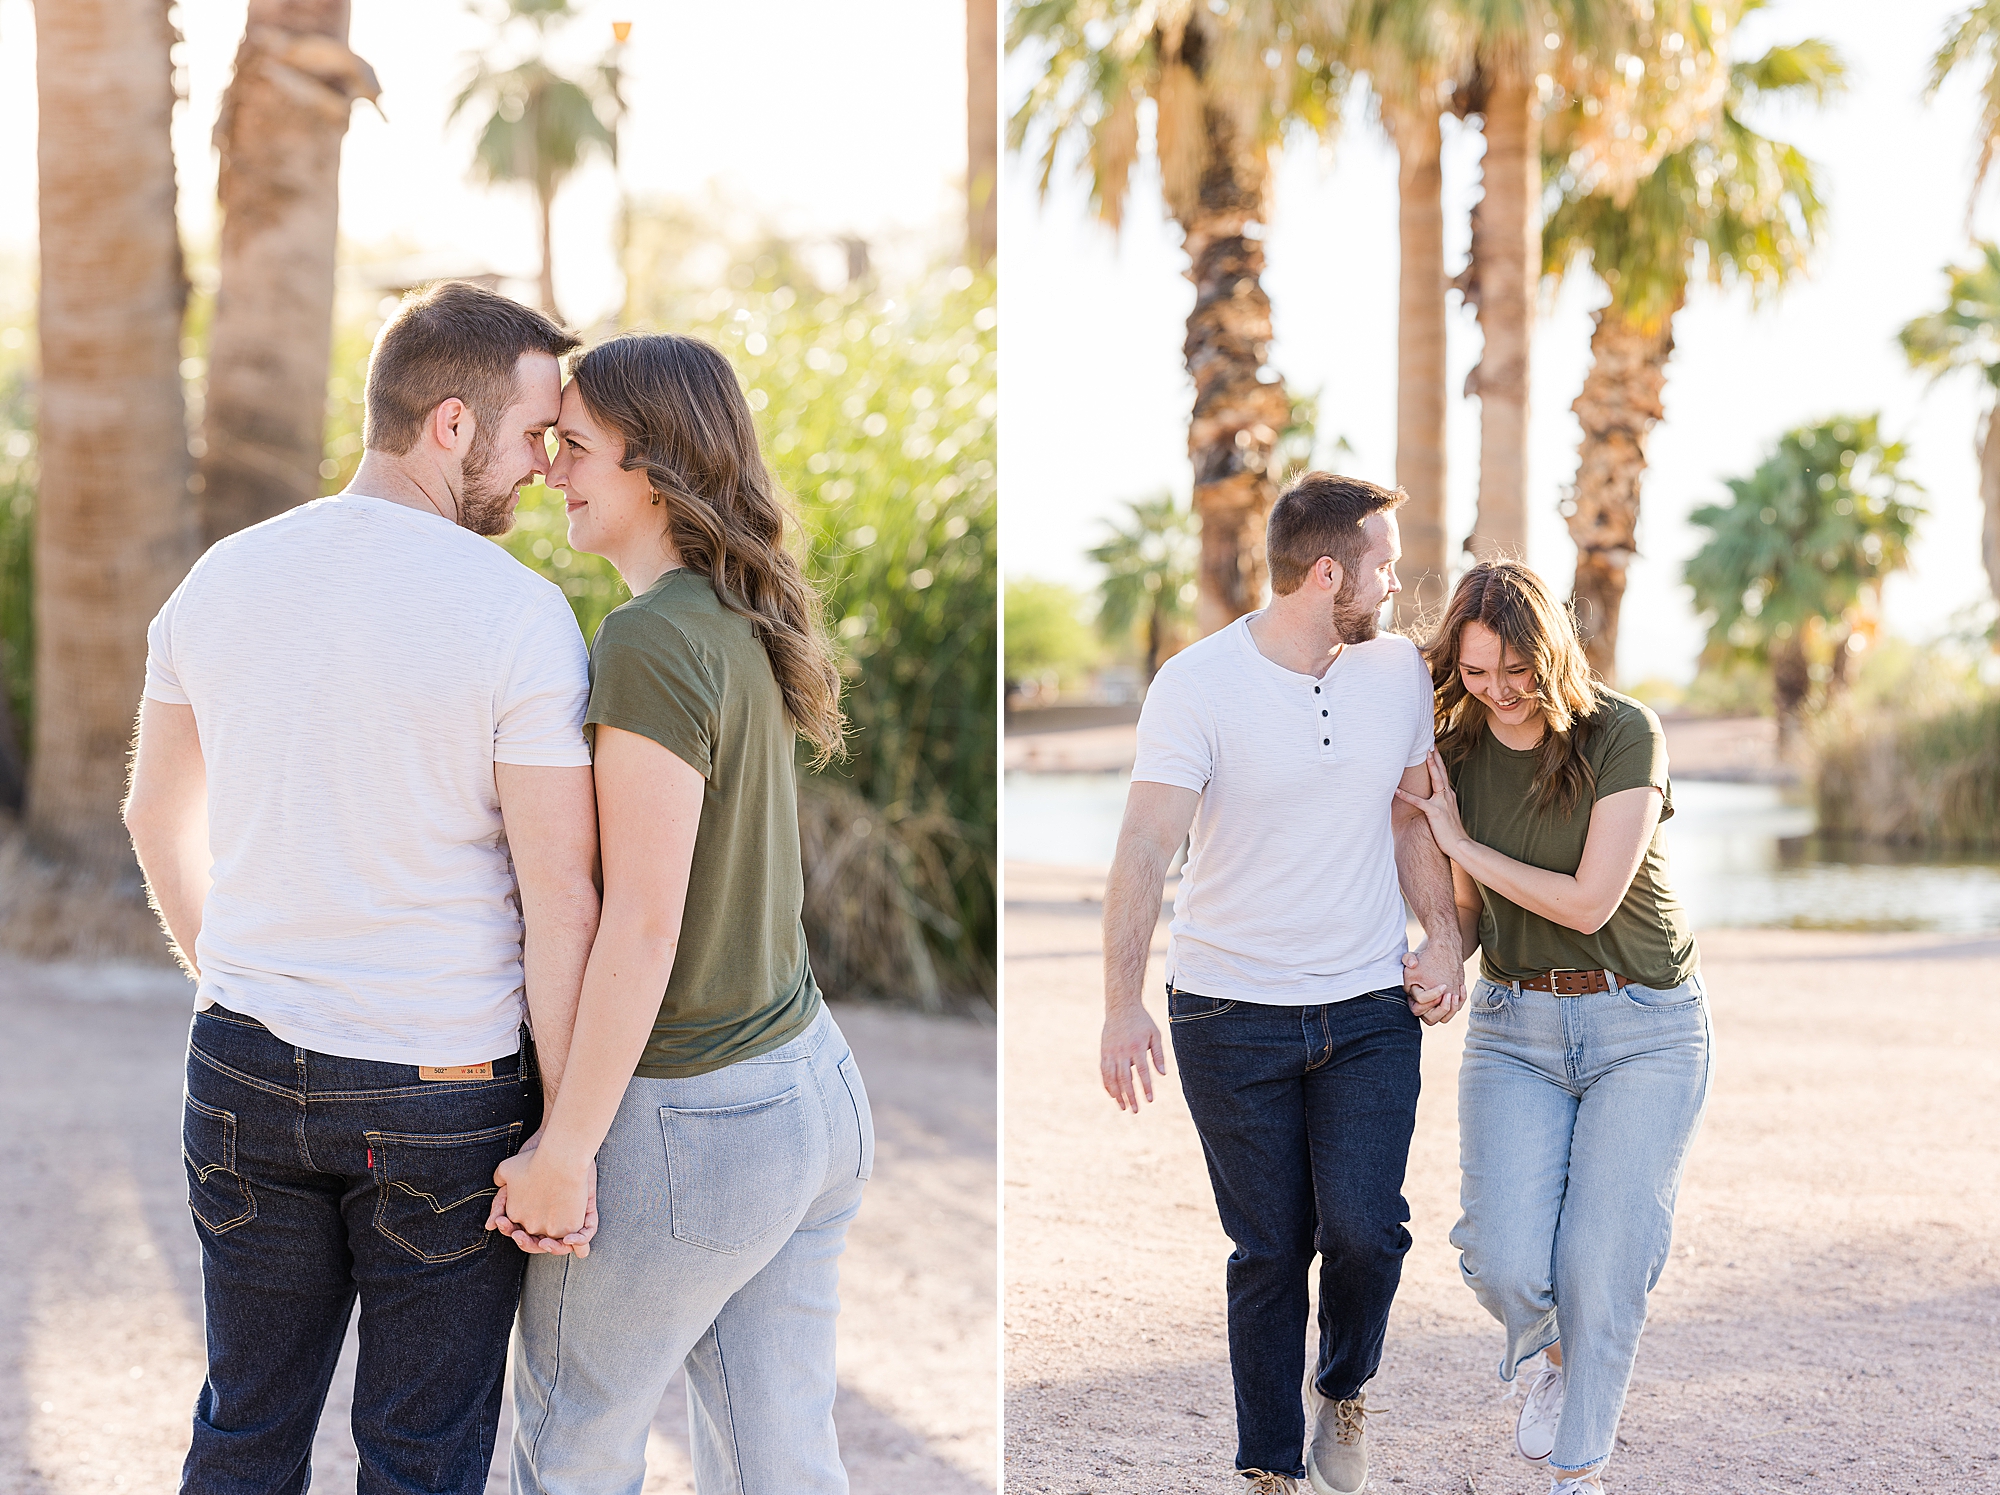 A loving moment of the couple gazing into each other's eyes at Papago Park during their engagement session
